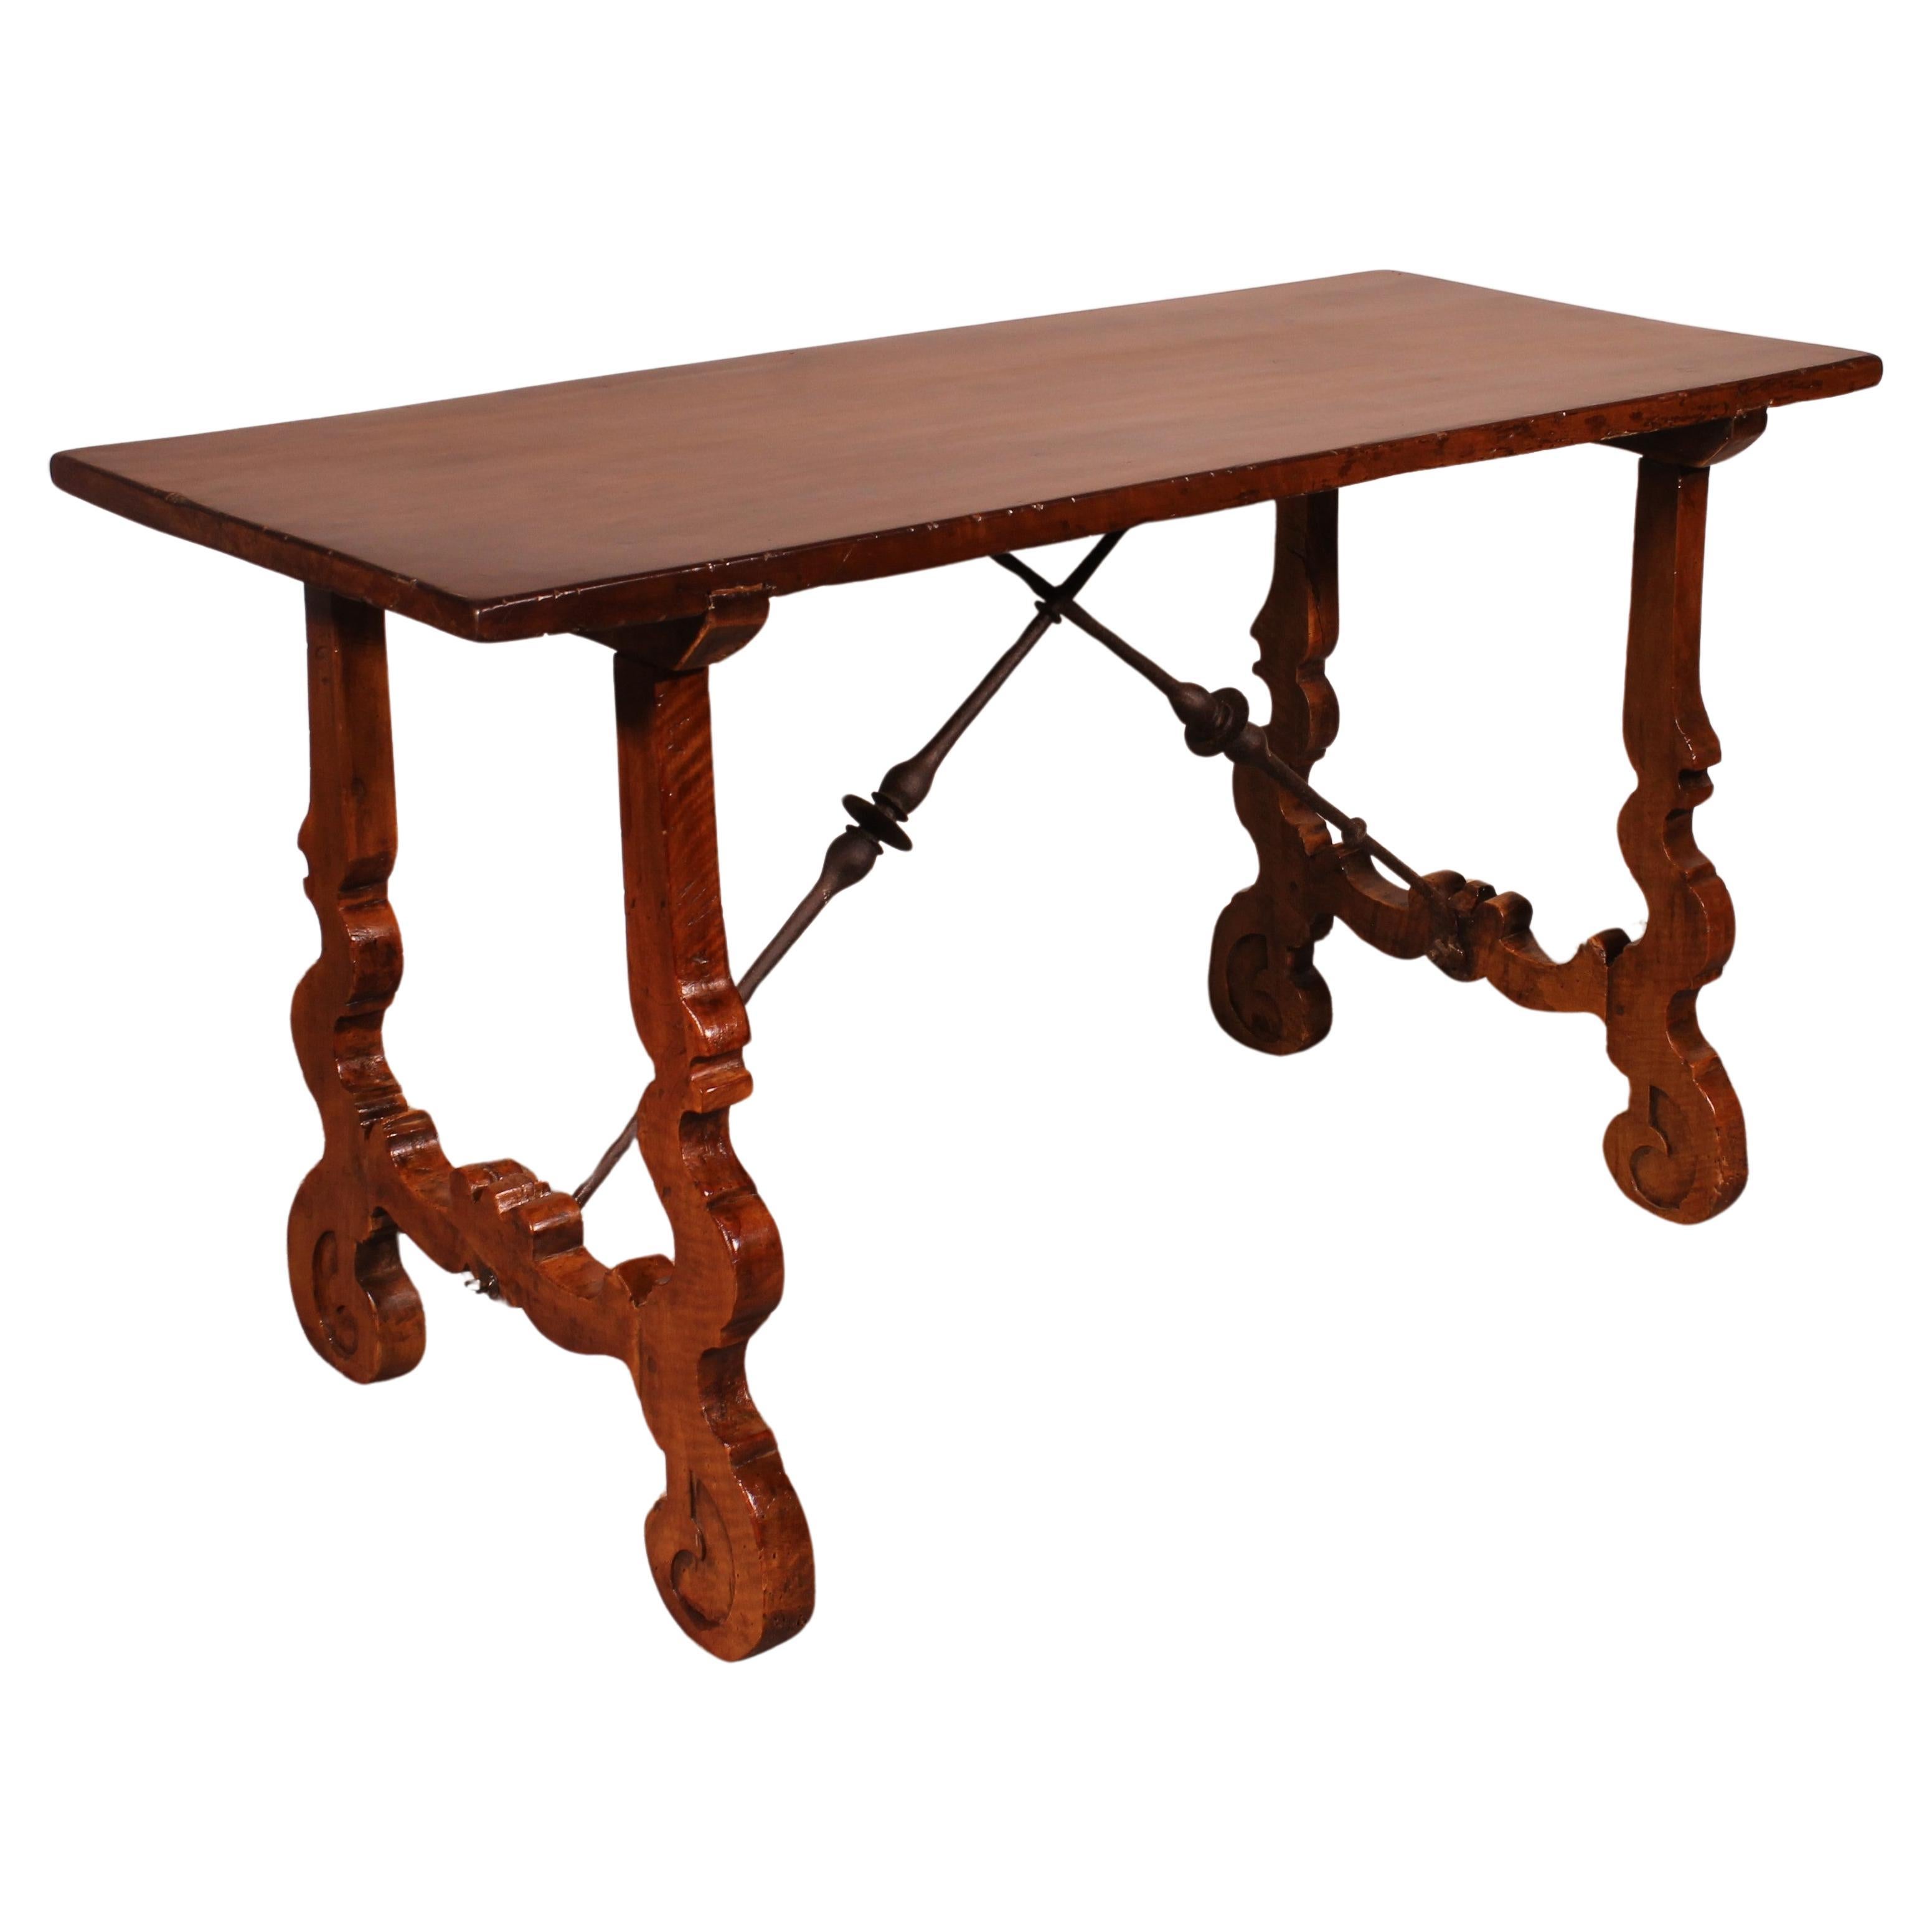 Catalan Console In Walnut -18th Century - Spain For Sale